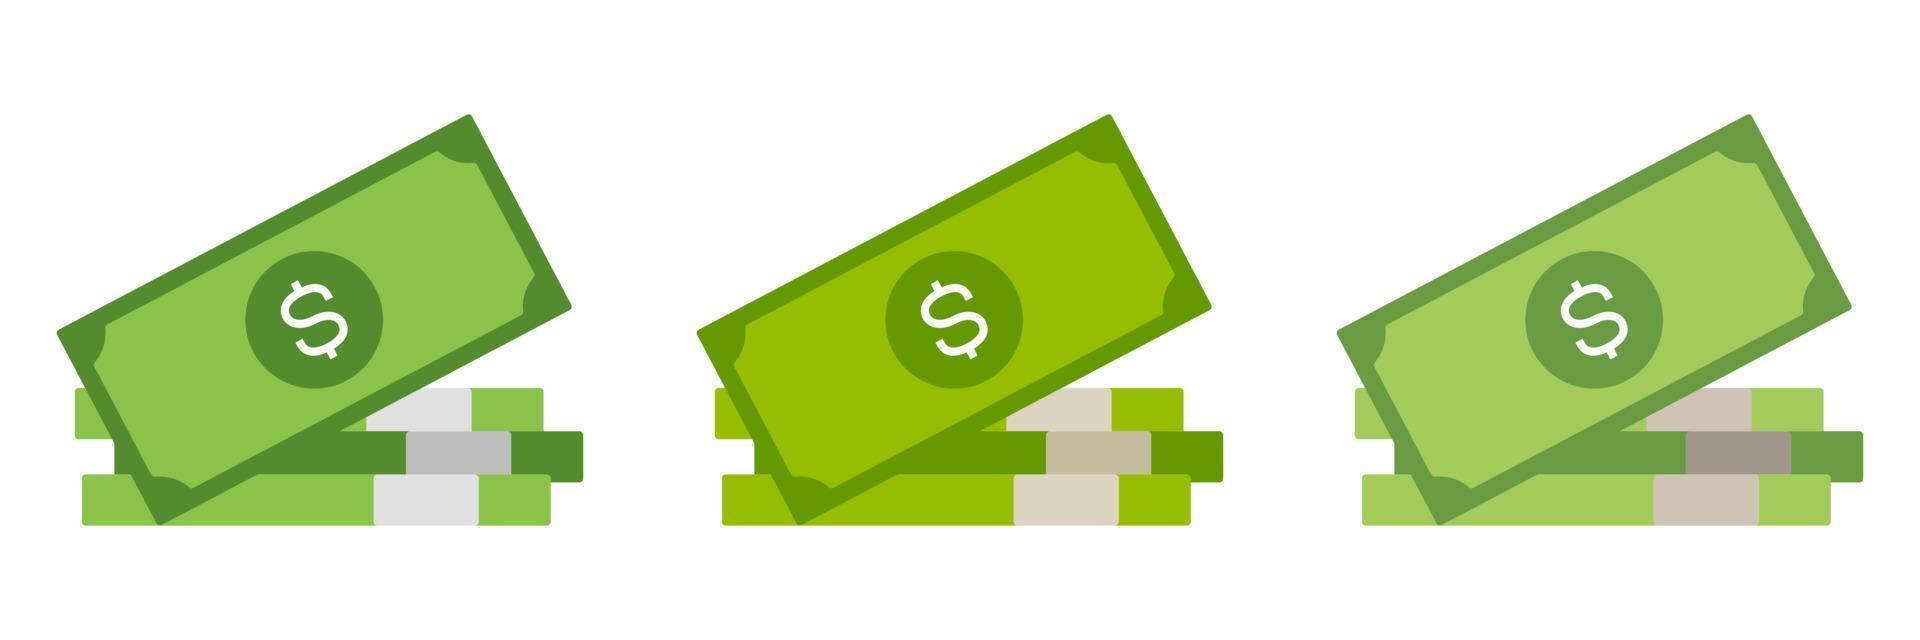 Money in flat style isolated vector